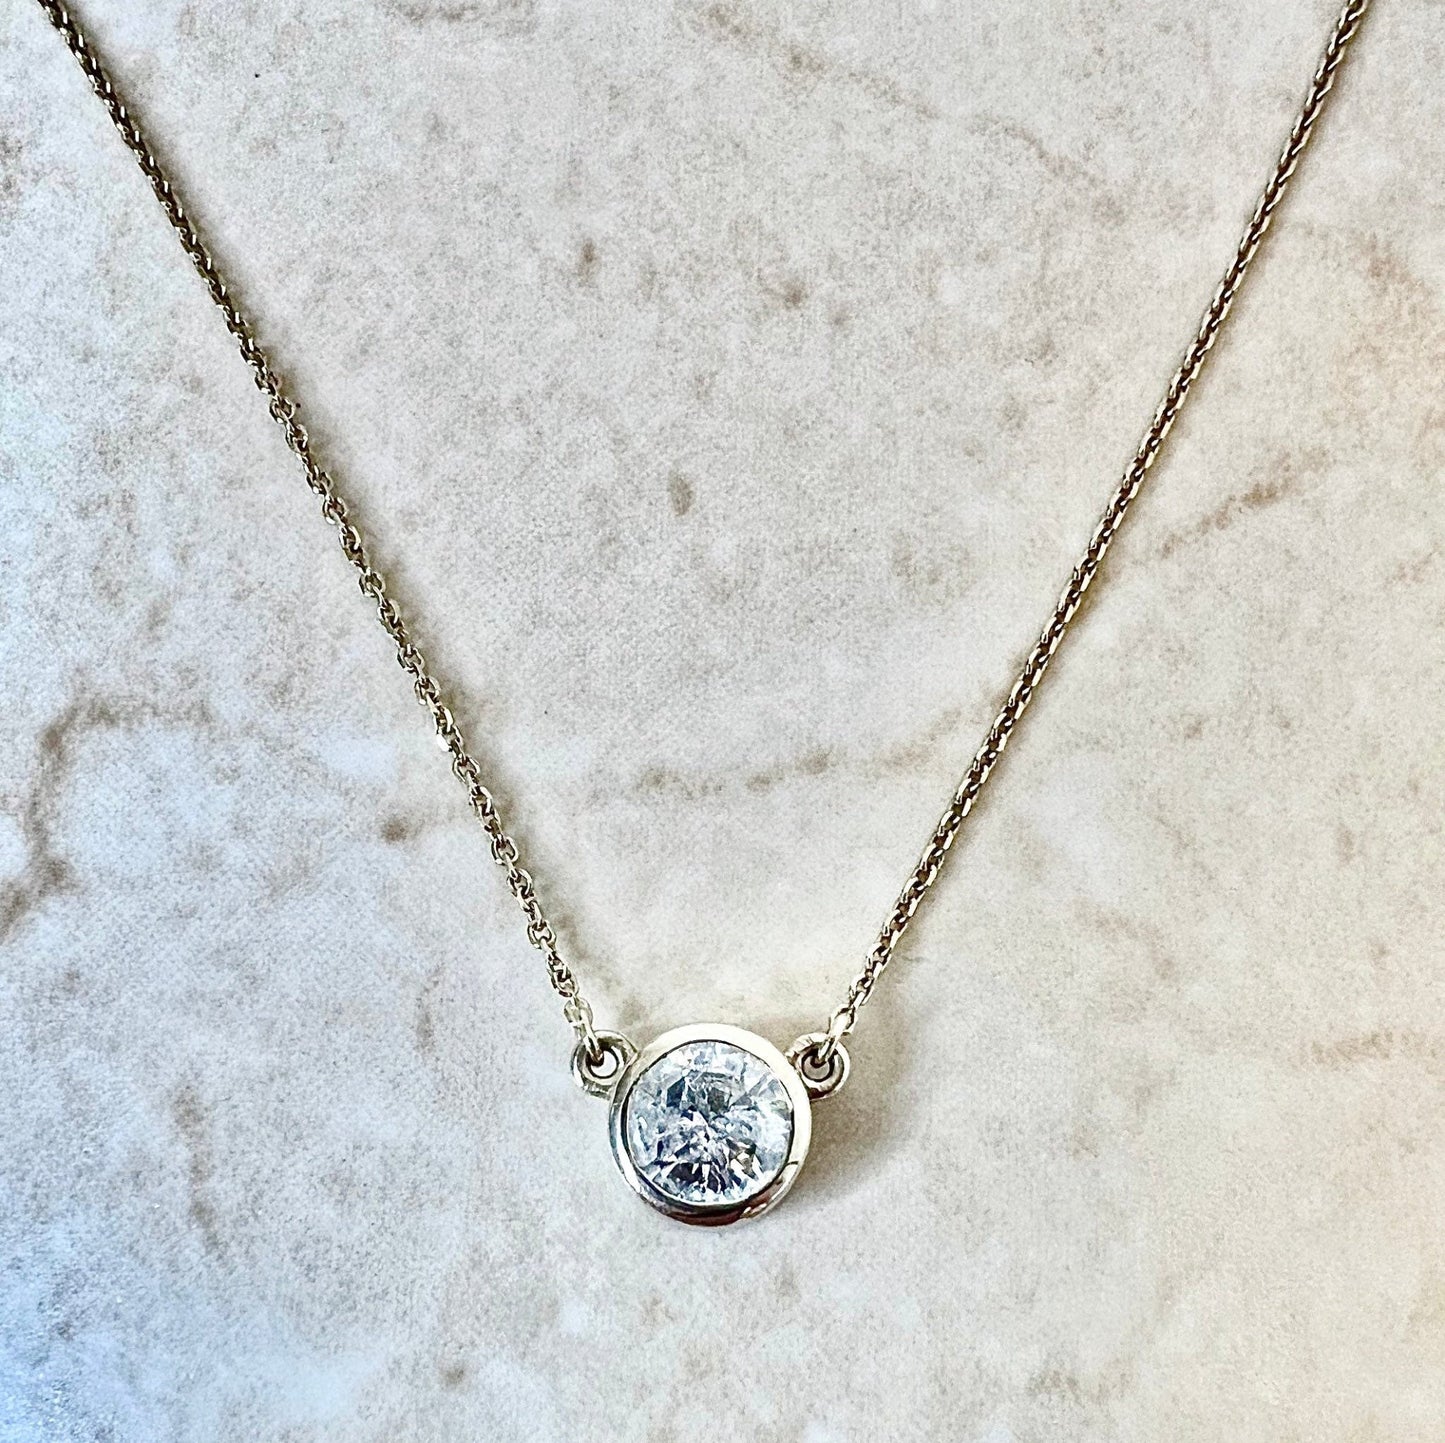 0.75 CT 14K Diamond Solitaire Necklace - Two Tone Gold Diamond Bezel Necklace -Diamond Necklace-Solitaire Pendant Necklace-Best Gift For Her